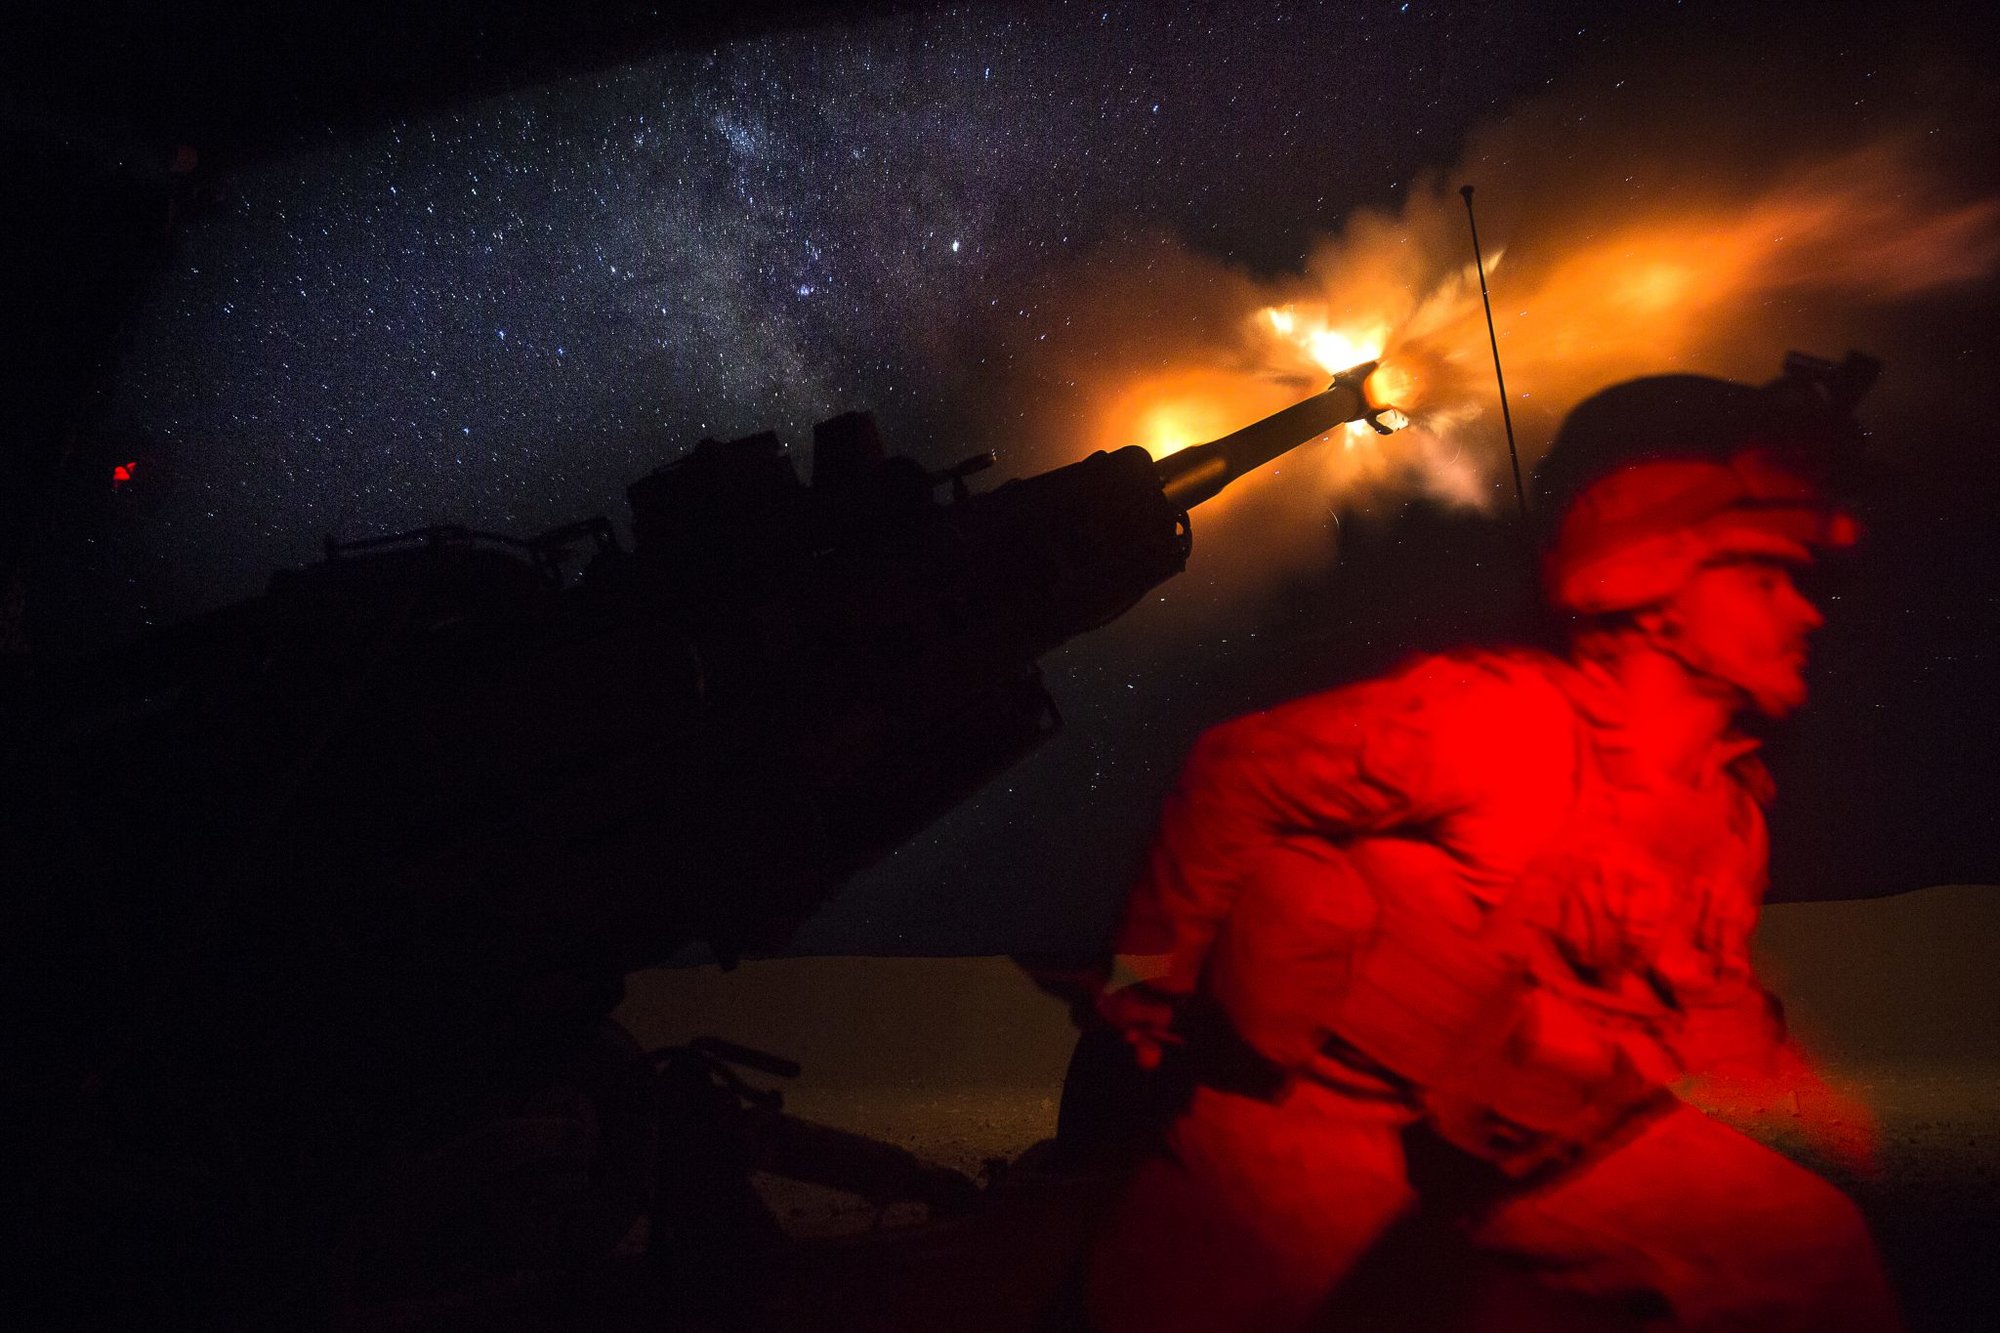 UNDISCLOSED LOCATION, SYRIA (June 3, 2017)— A U.S. Marine fires an M777-A2 Howitzer in the early morning in Syria, June 3, 2017. They have been conducting 24-hour all-weather fire support for the Coalition’s local partners, the Syrian Democratic Forces, as part of Combined Joint Task Force-Operation Inherent Resolve. CJTF-OIR is the global coalition to defeat ISIS in Iraq and Syria. (U.S. Marine Corps photo by Sgt. Matthew Callahan)